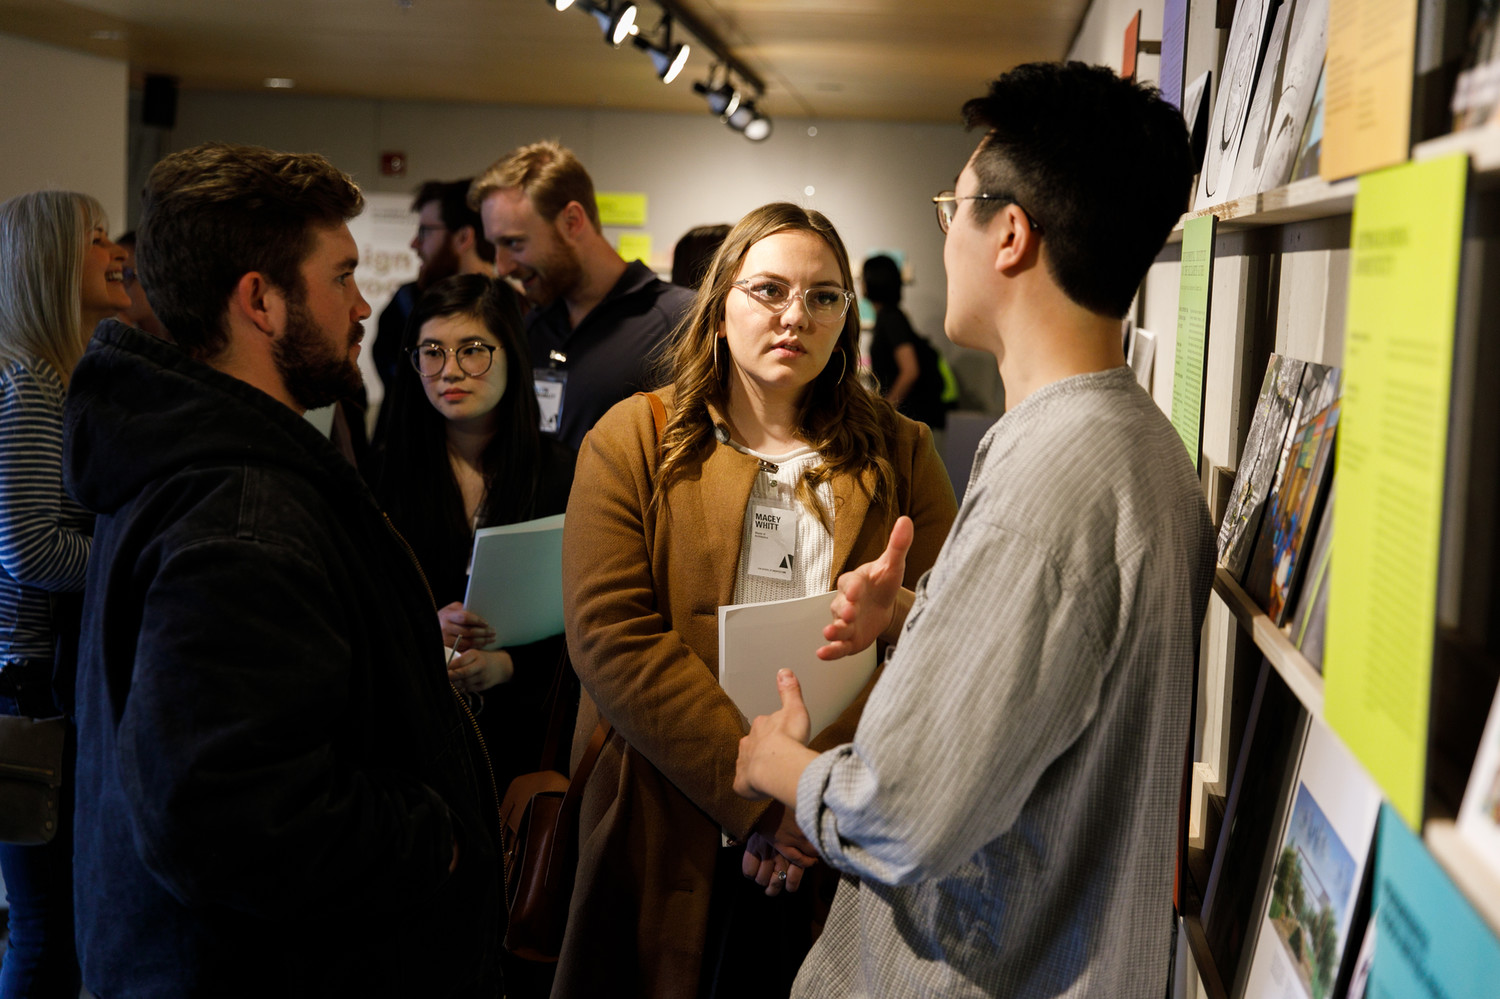 Design Advocacy: An Exhibition of Inclusionary Practice curated by manifestA, in partnership with NOMAS and the UVA School of Architecture Inclusion and Equity Committee, features the work of current students, faculty and alumni focused on diverse forms of spatial and cultural advocacy.